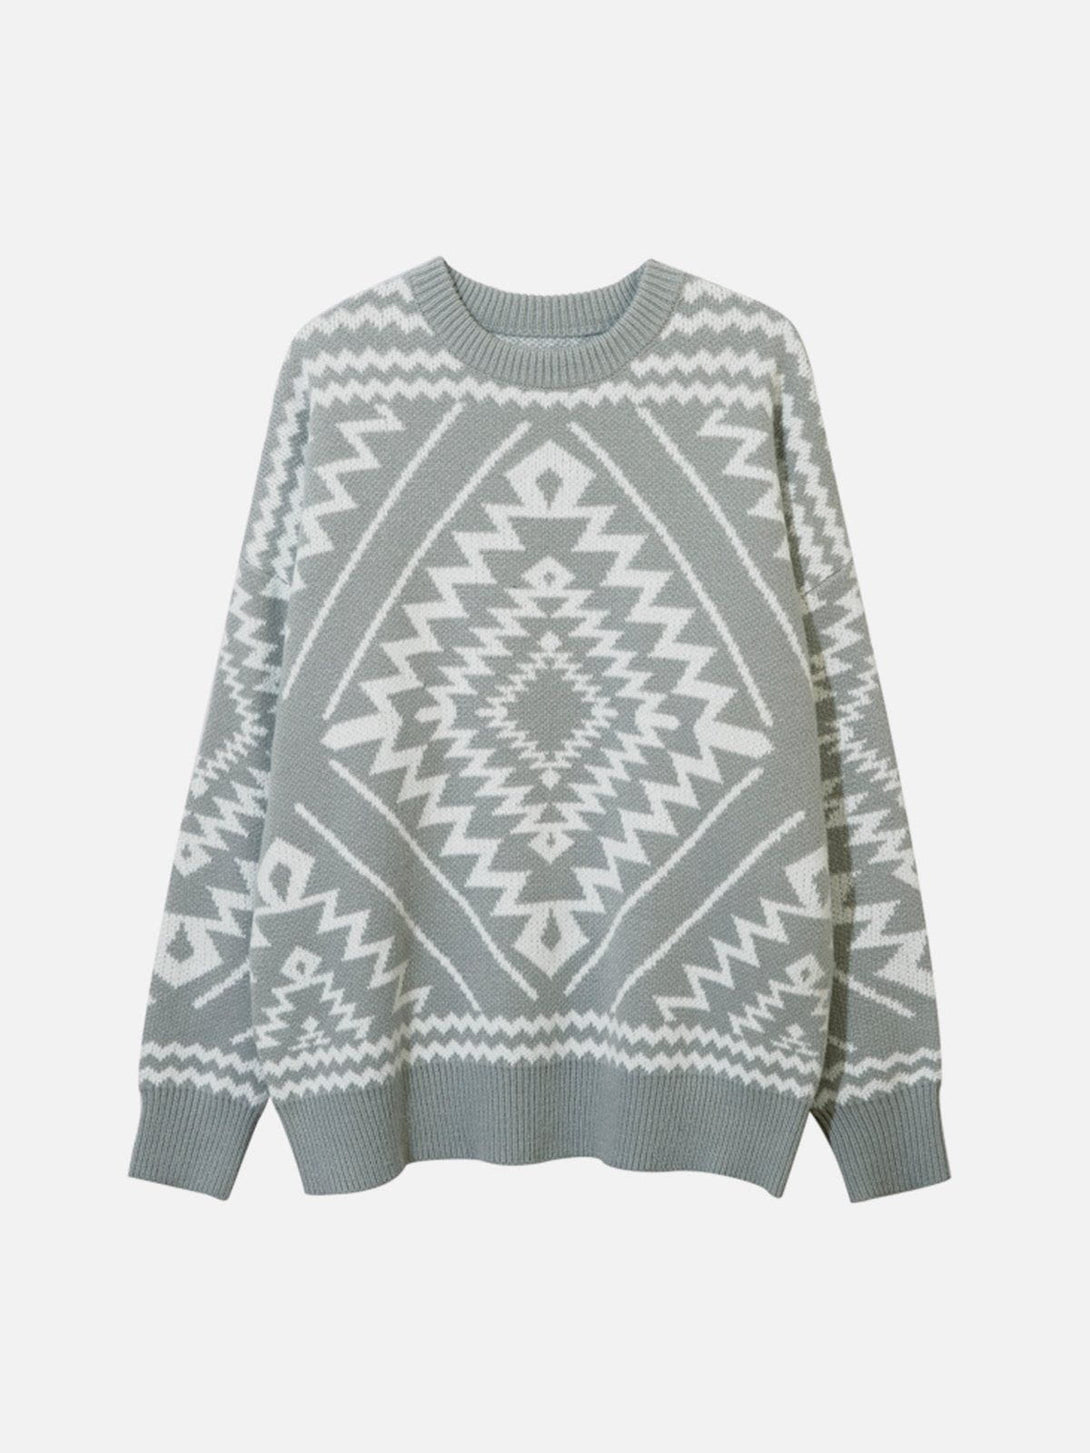 Ellesey - Totem Graphic Sweater-Streetwear Fashion - ellesey.com